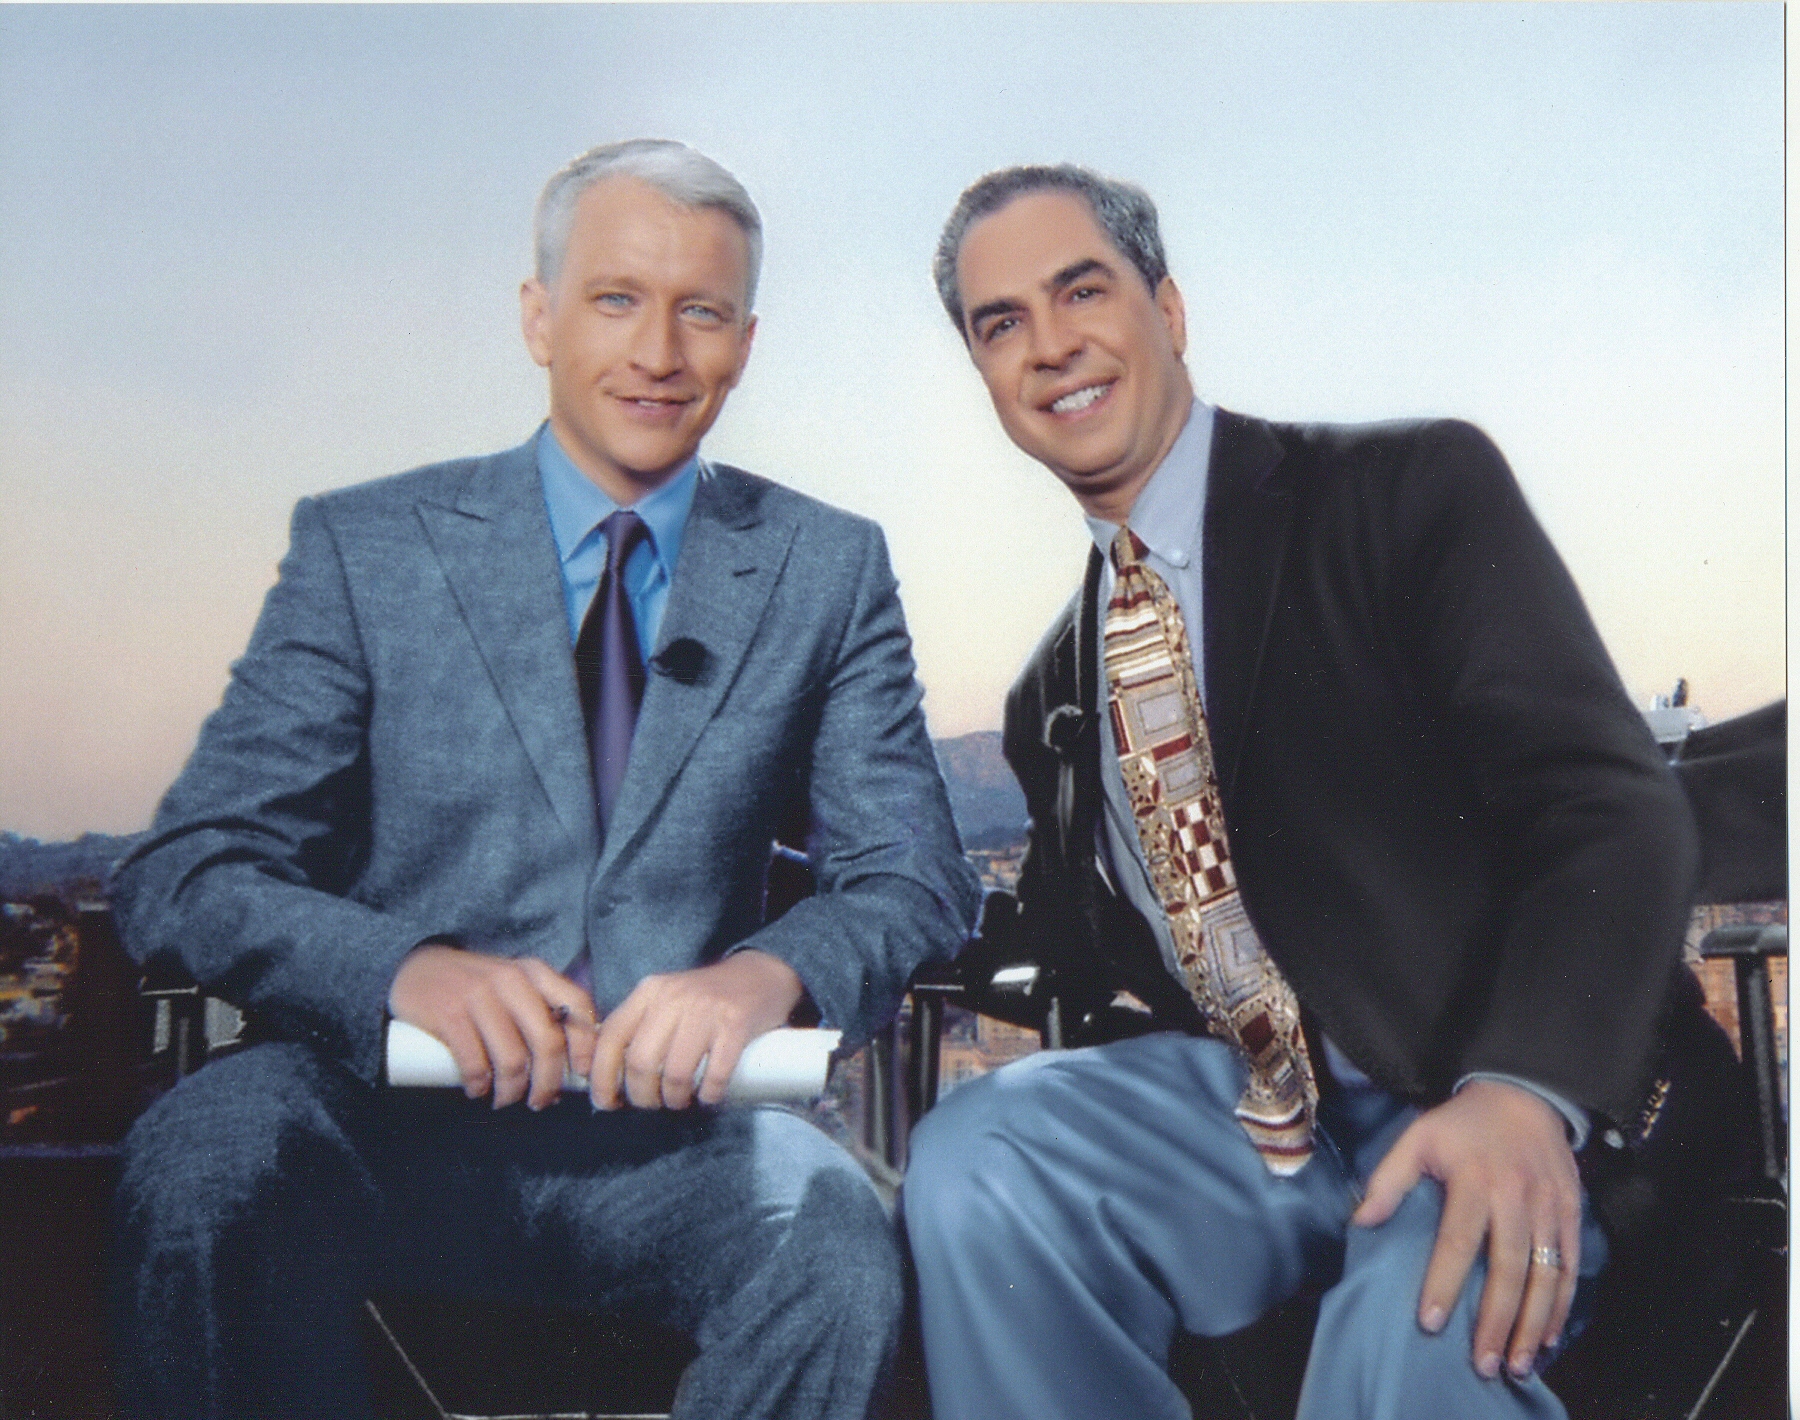 On set with CNN's Anderson Cooper after appearing on Anderson Cooper 360. We taped on the rooftop of CNN's building in LA.